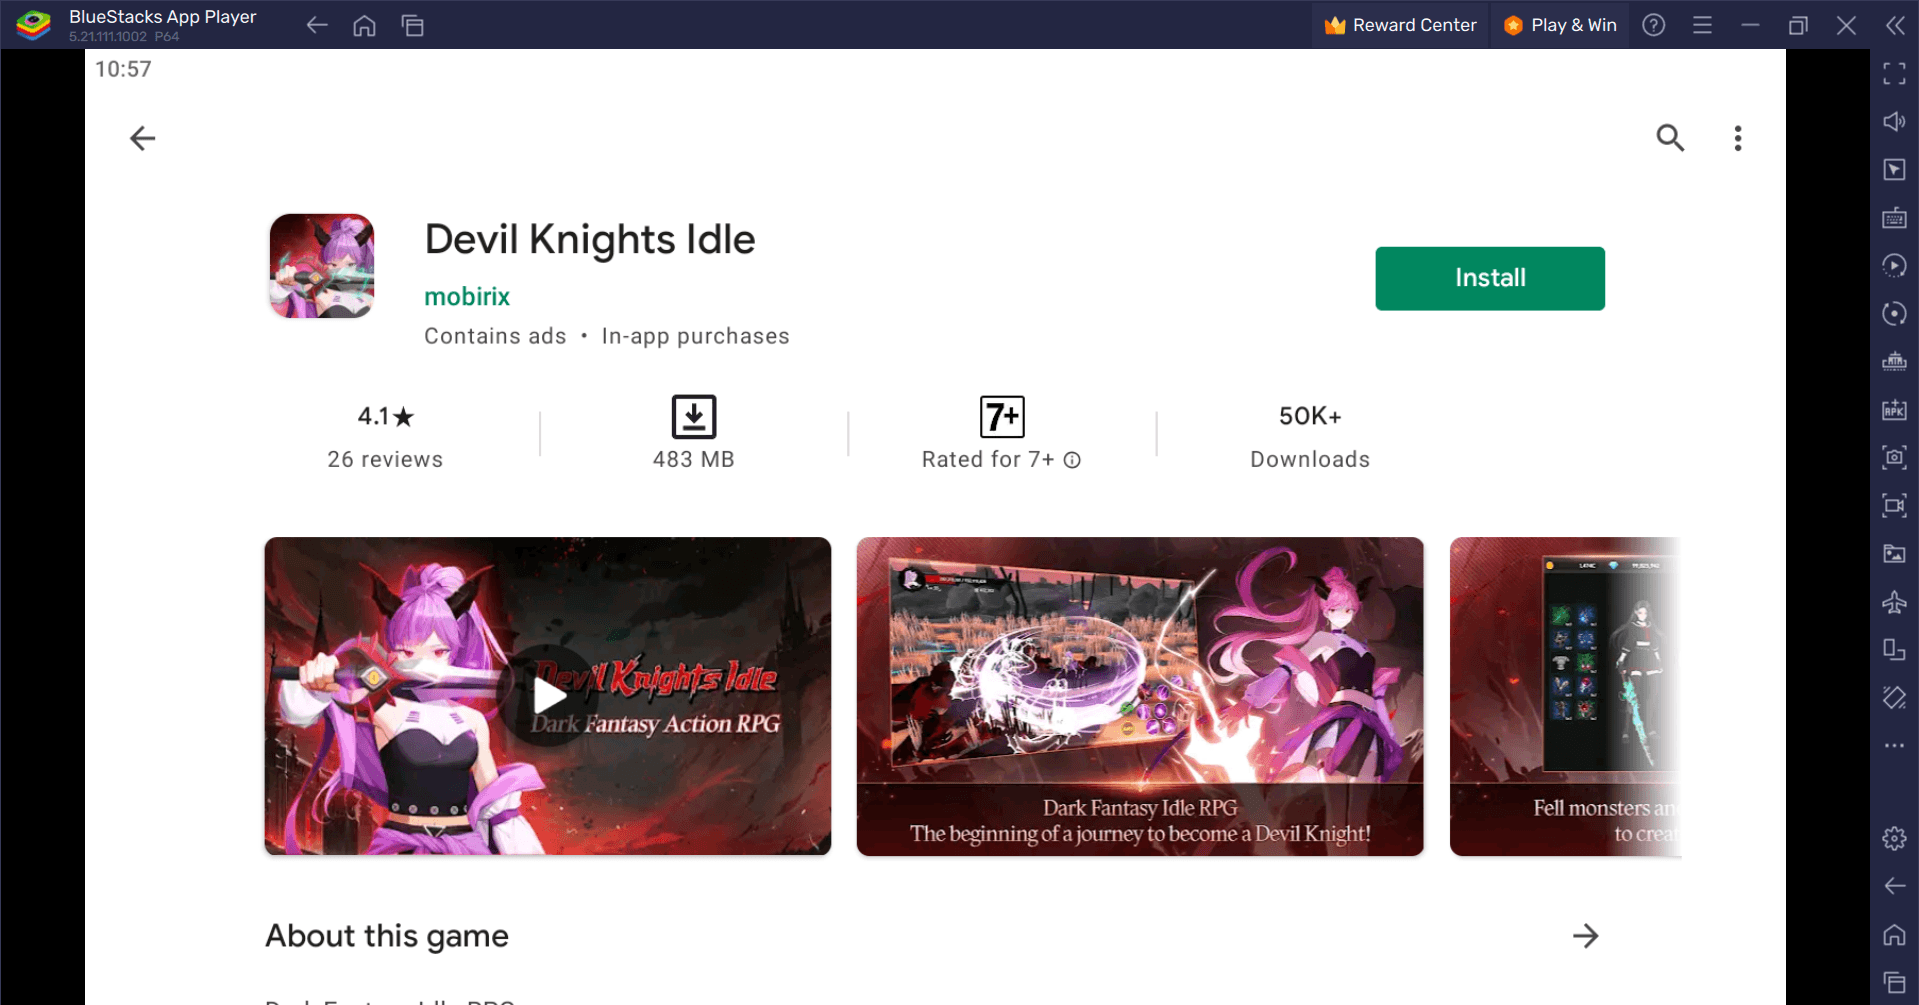 How to Play Devil Knights Idle on PC with BlueStacks